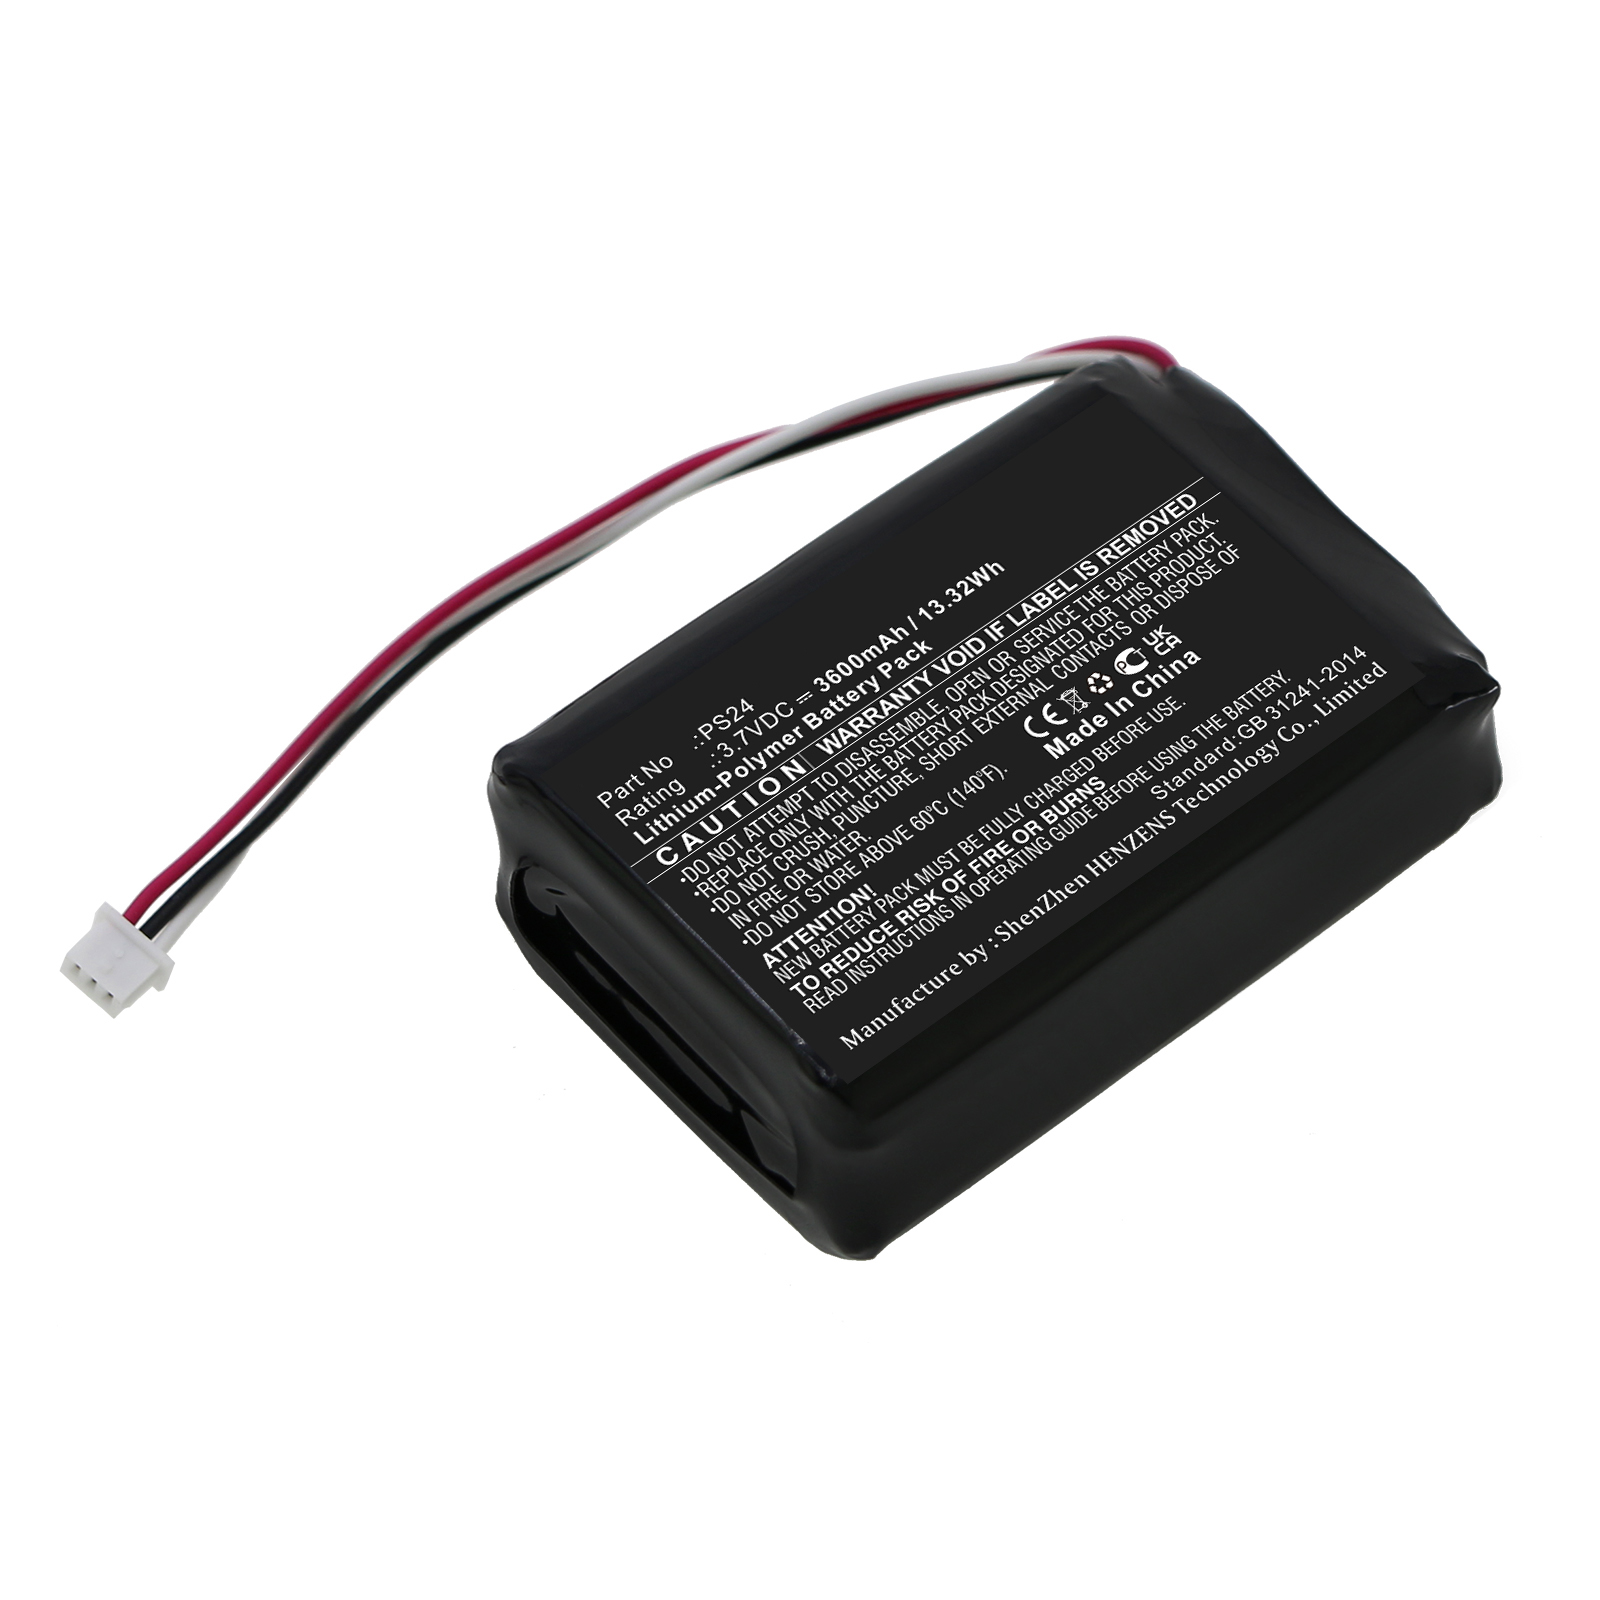 Synergy Digital Thermal Camera Battery, Compatible with Flir PS24 Thermal Camera Battery (Li-Pol, 3.7V, 3600mAh)